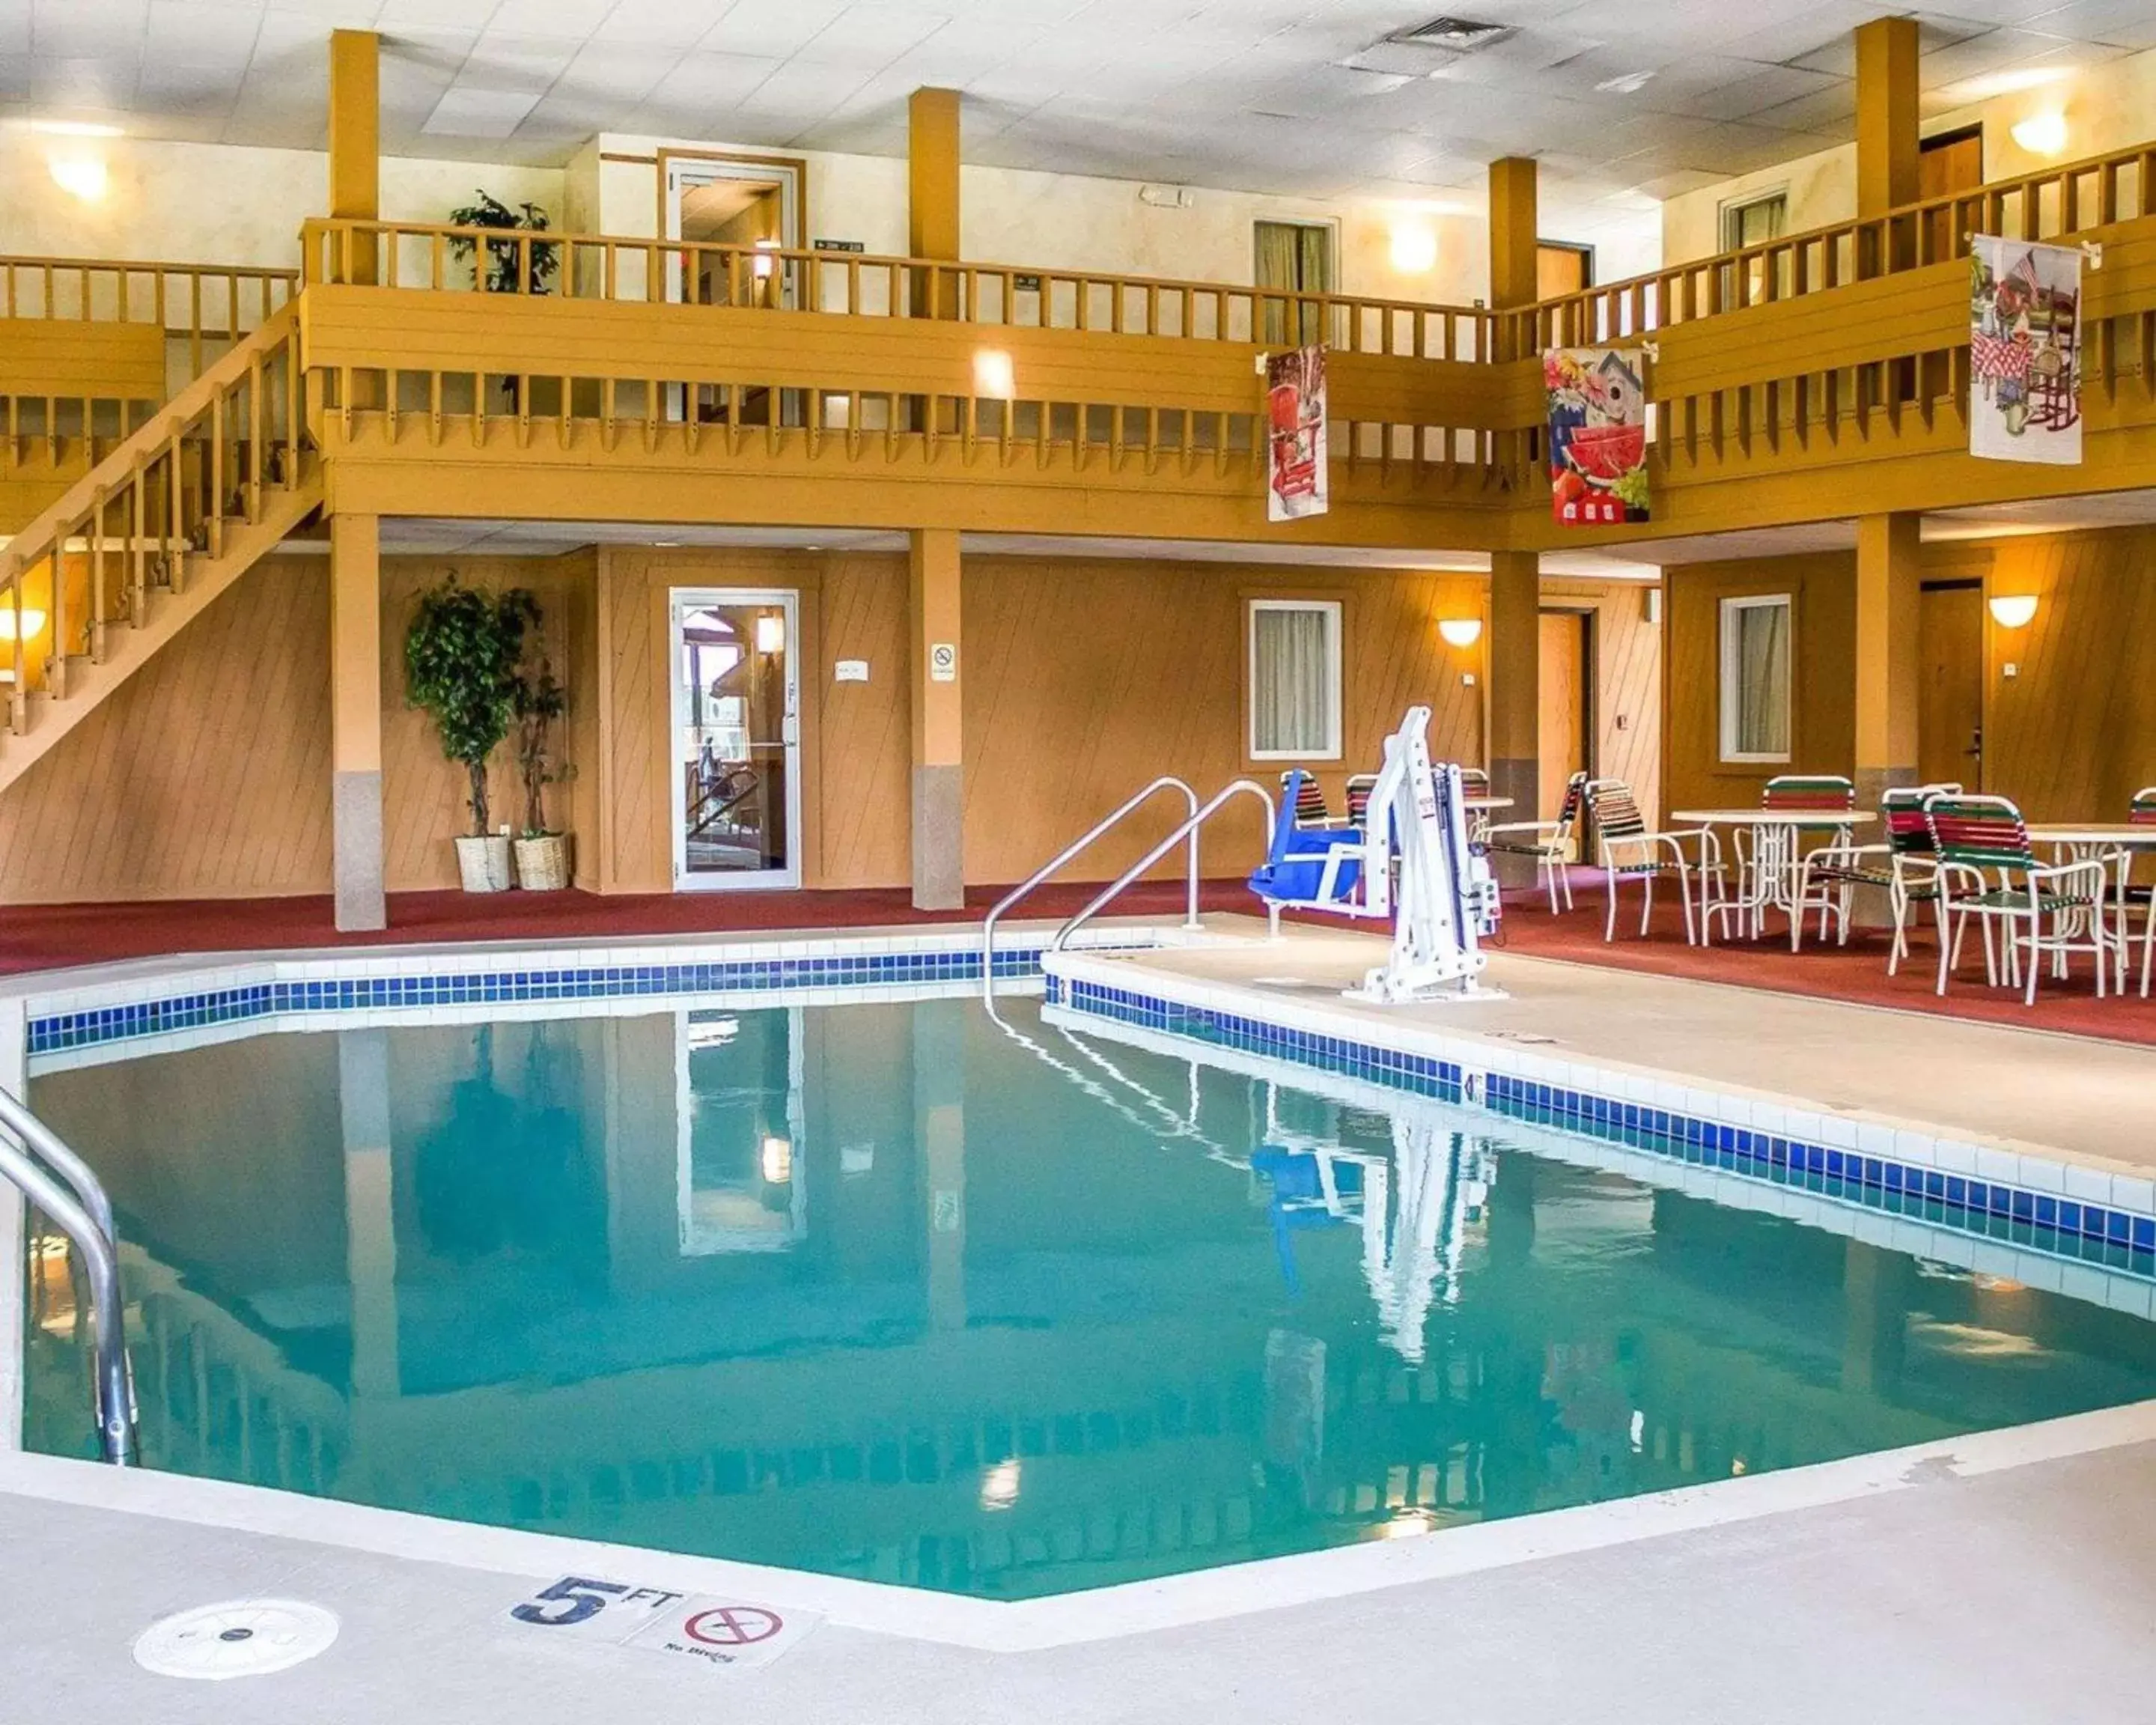 On site, Swimming Pool in Quality Inn Mauston